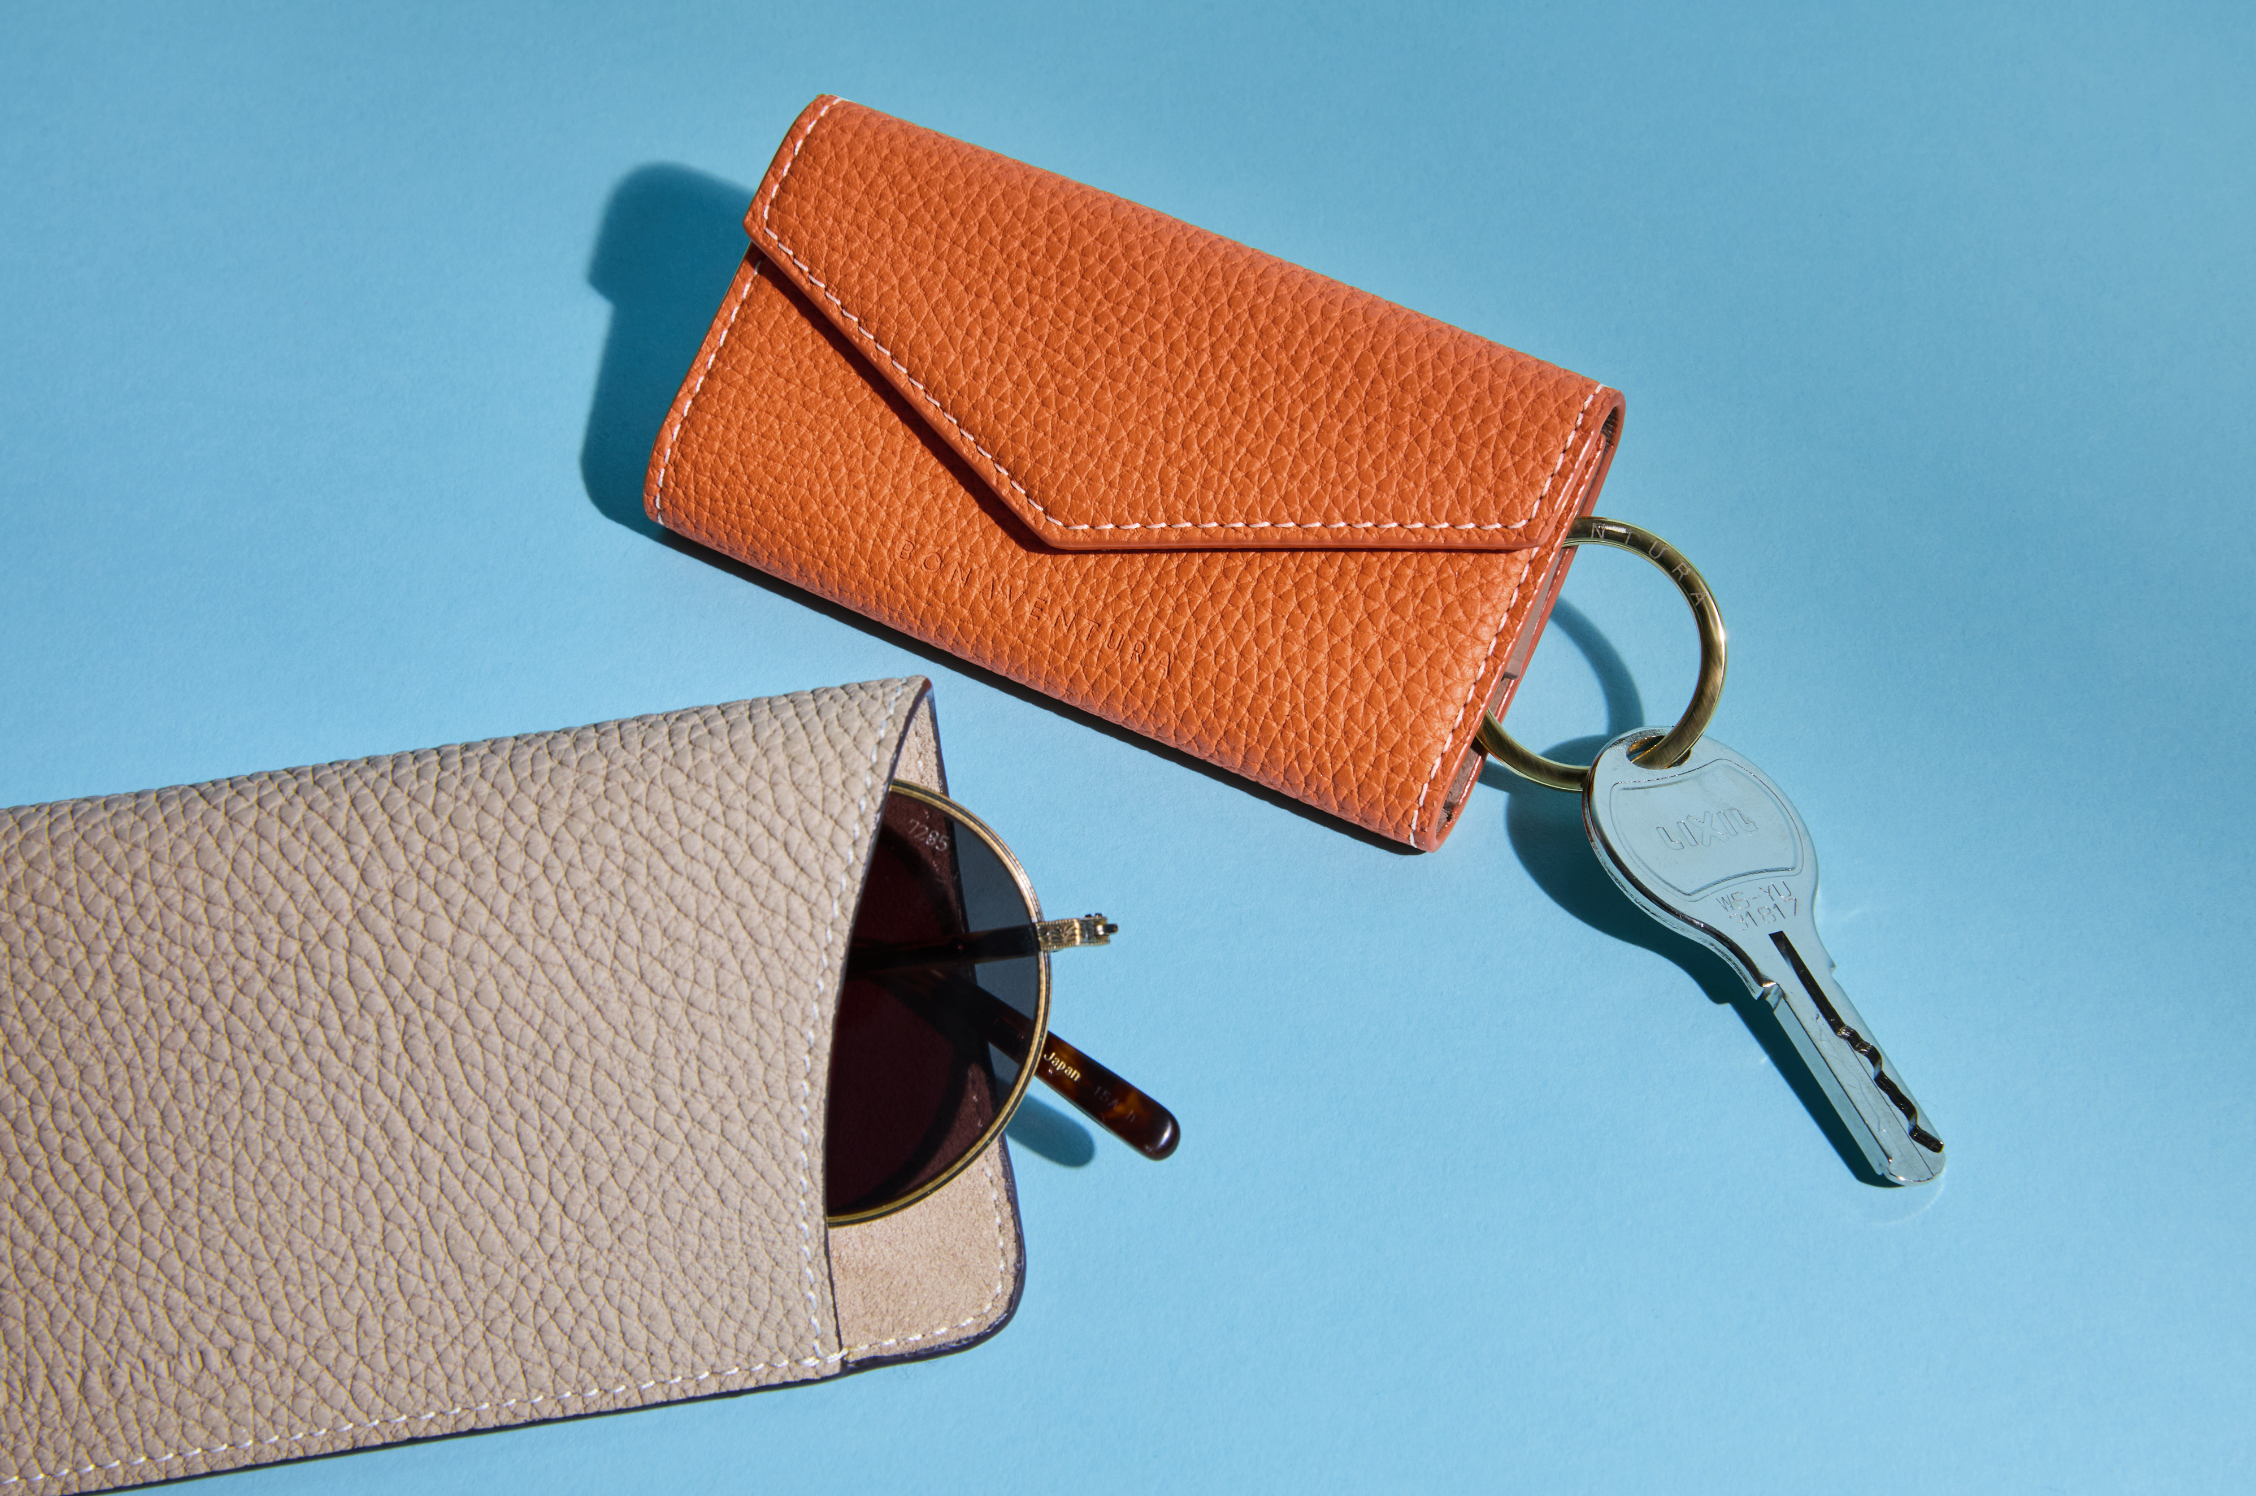 High-quality leather accessories that are perfect as gift ideas for this summer.